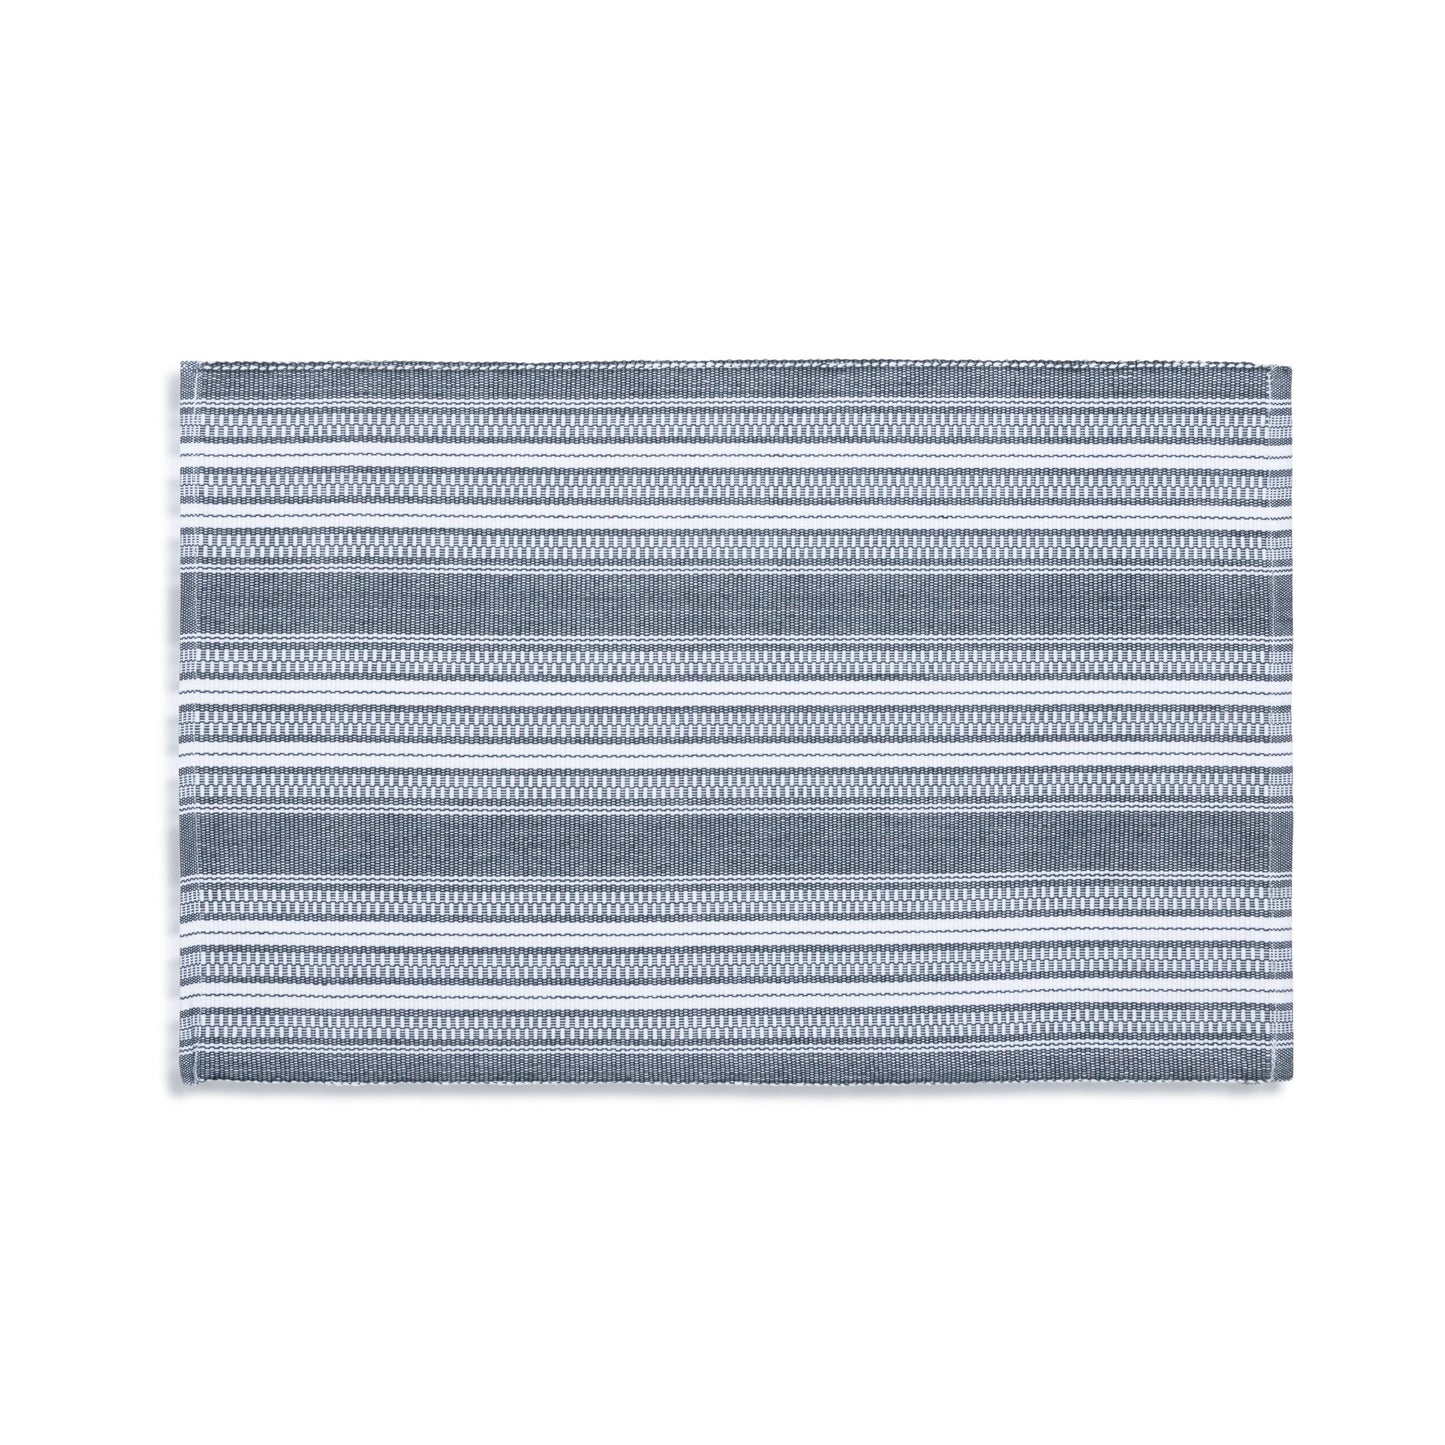 Black Stripe Woven Dining Room Table Placemat